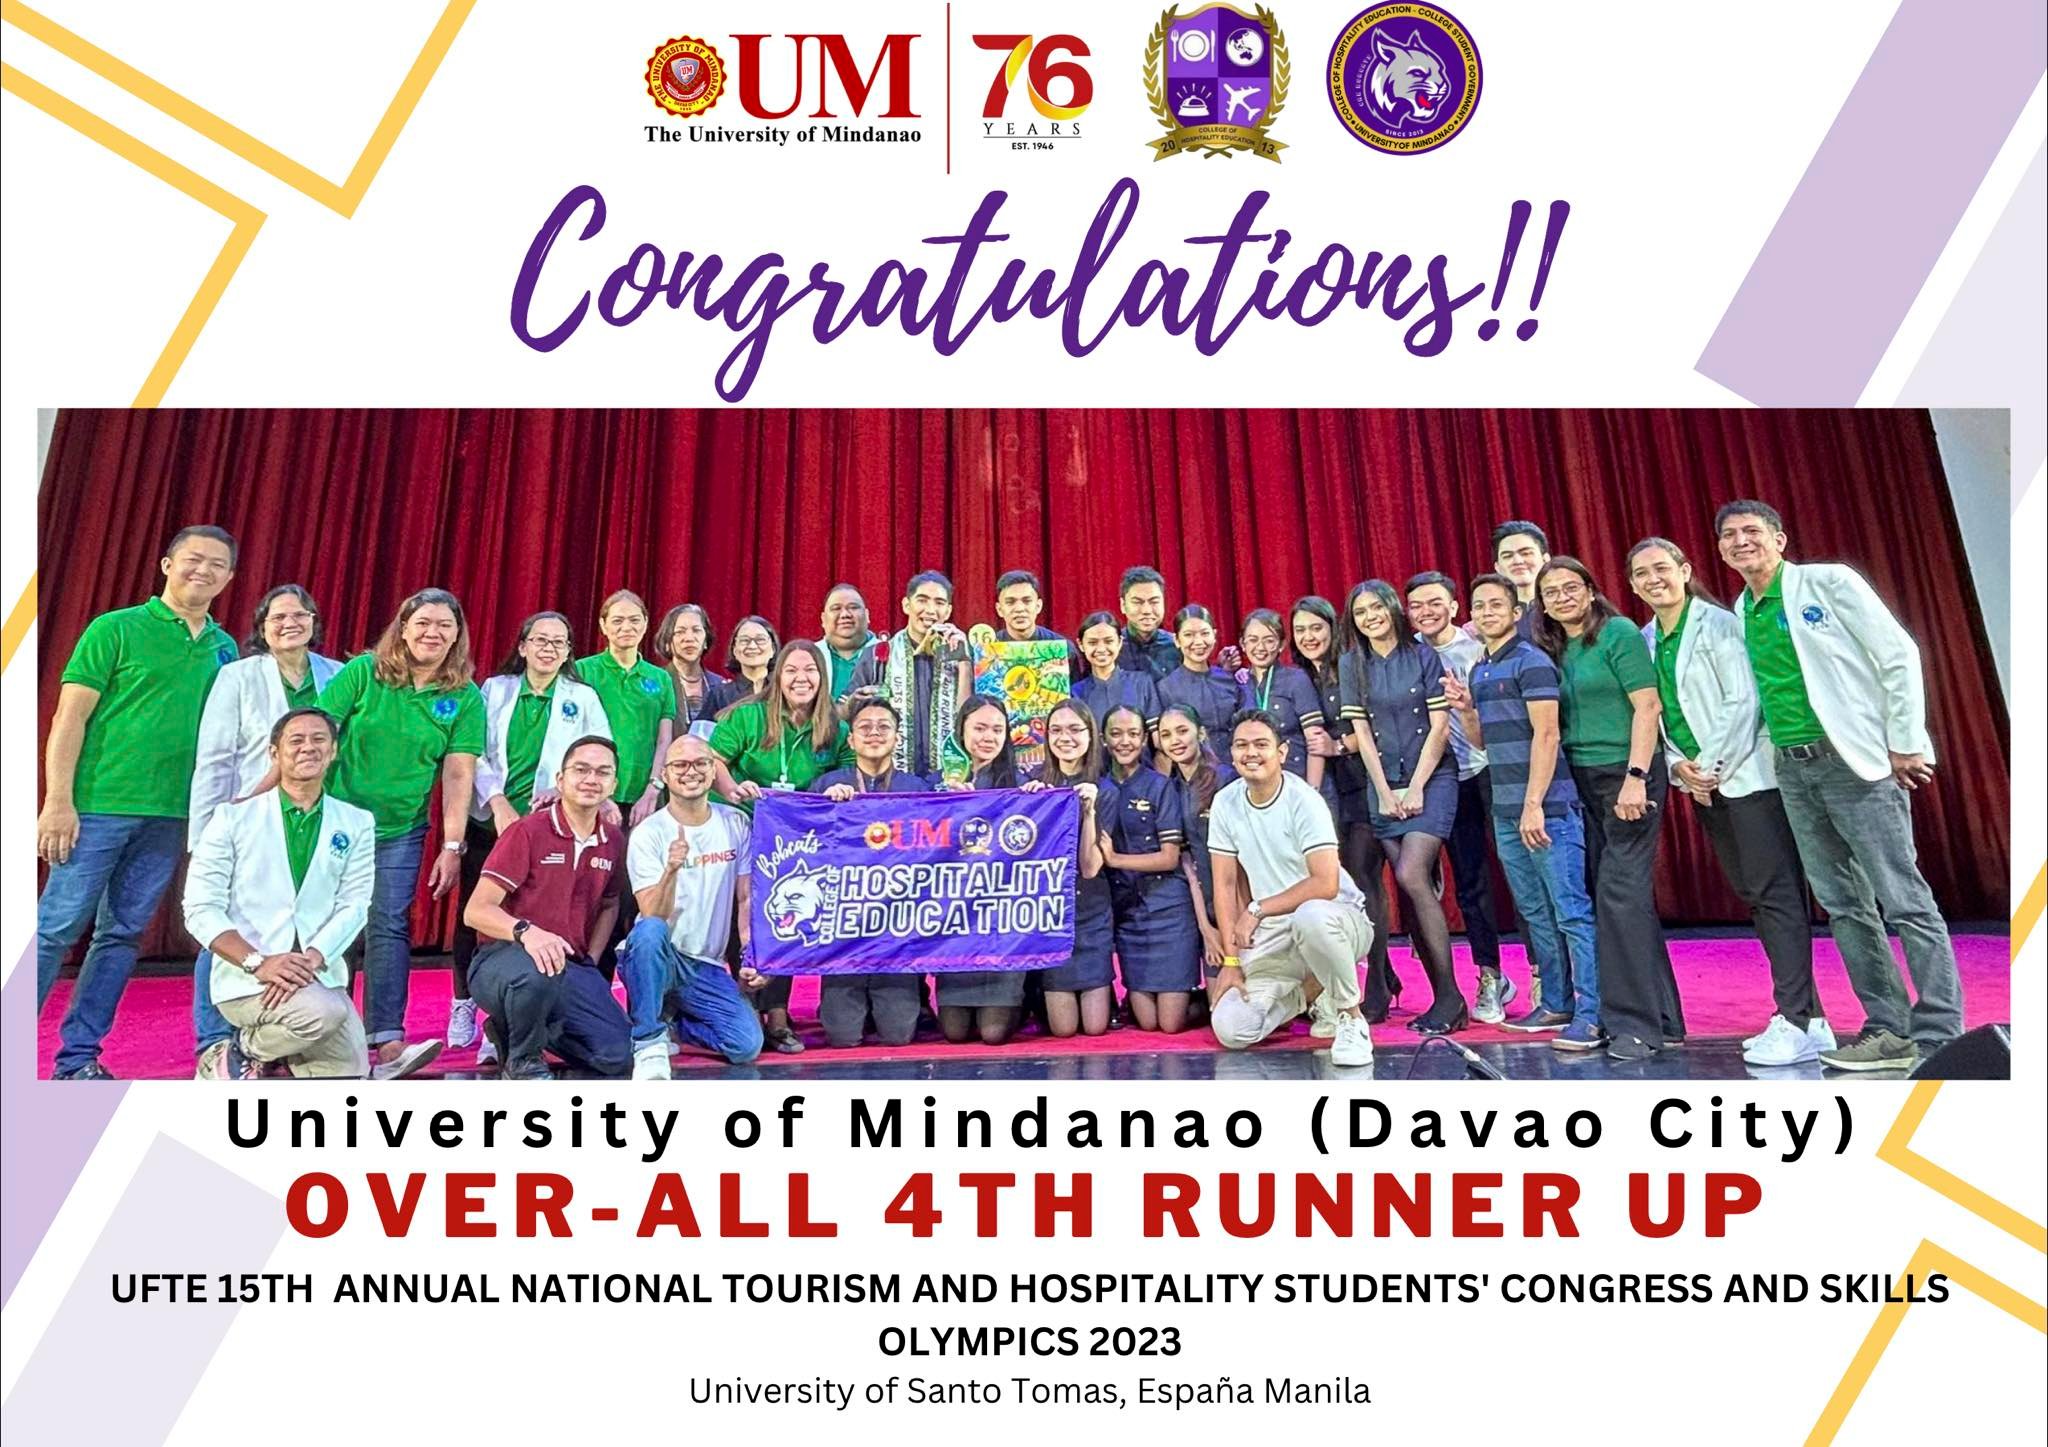 CHE reaps awards at Union of Filipino Tourism Students National Skills Olympics 2023